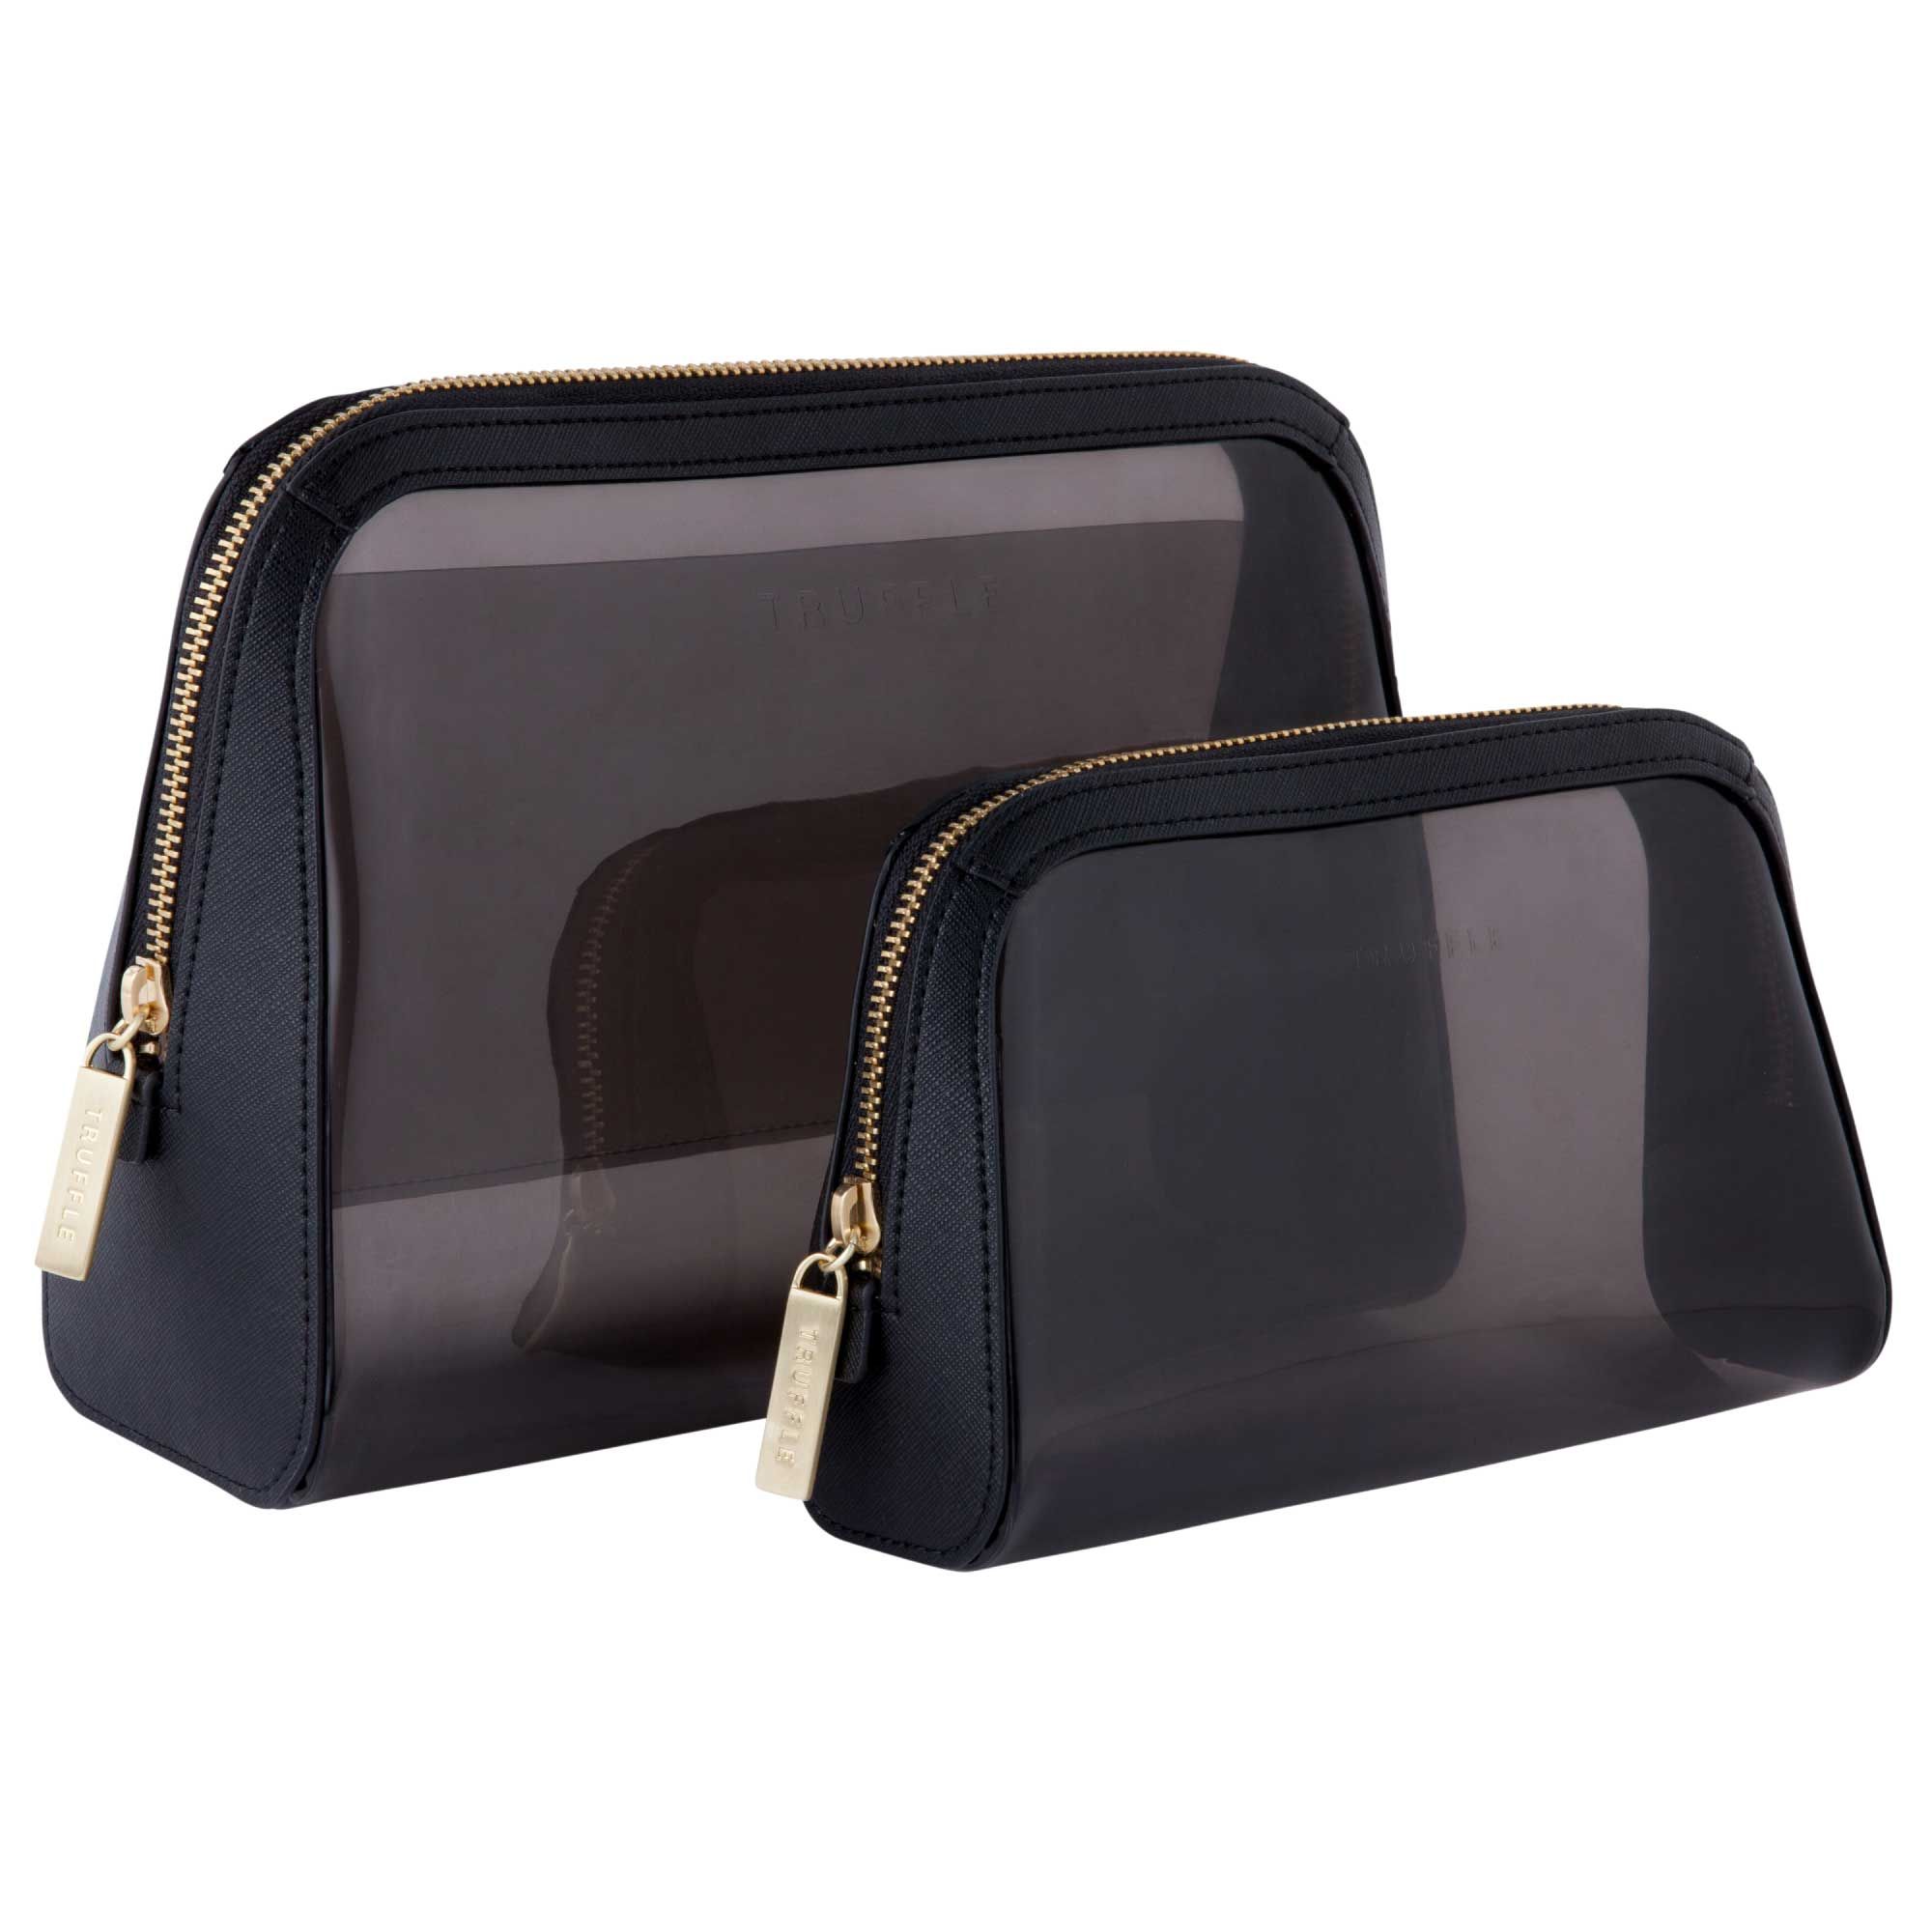 Vanity Pouch Set - Travel Pouch Set | Tinted Plastic Pouches | TRUFFLE